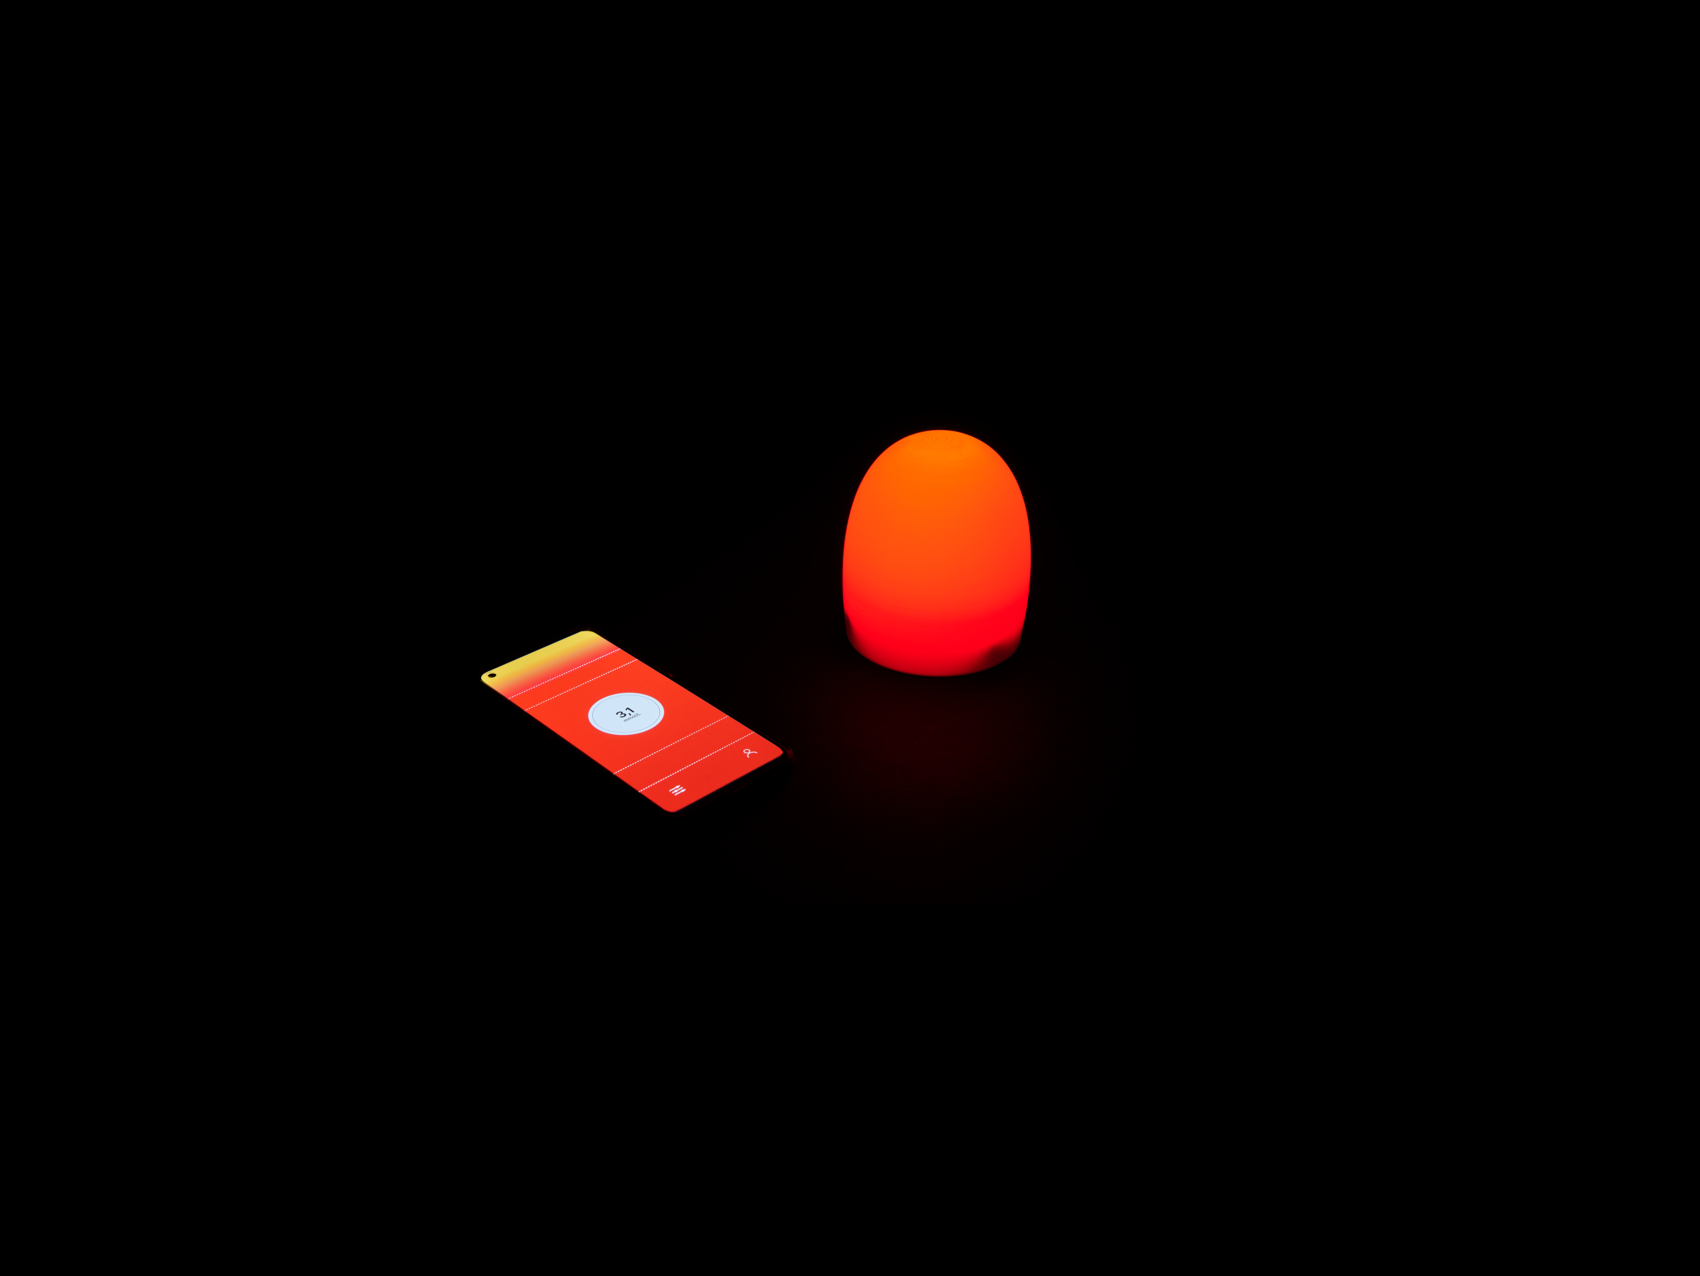 The image shows a smartphone with a red-lit screen displaying low blood sugar levels at 3,1 mmol, placed next to a small, glowing red lamp, both in a dark environment.